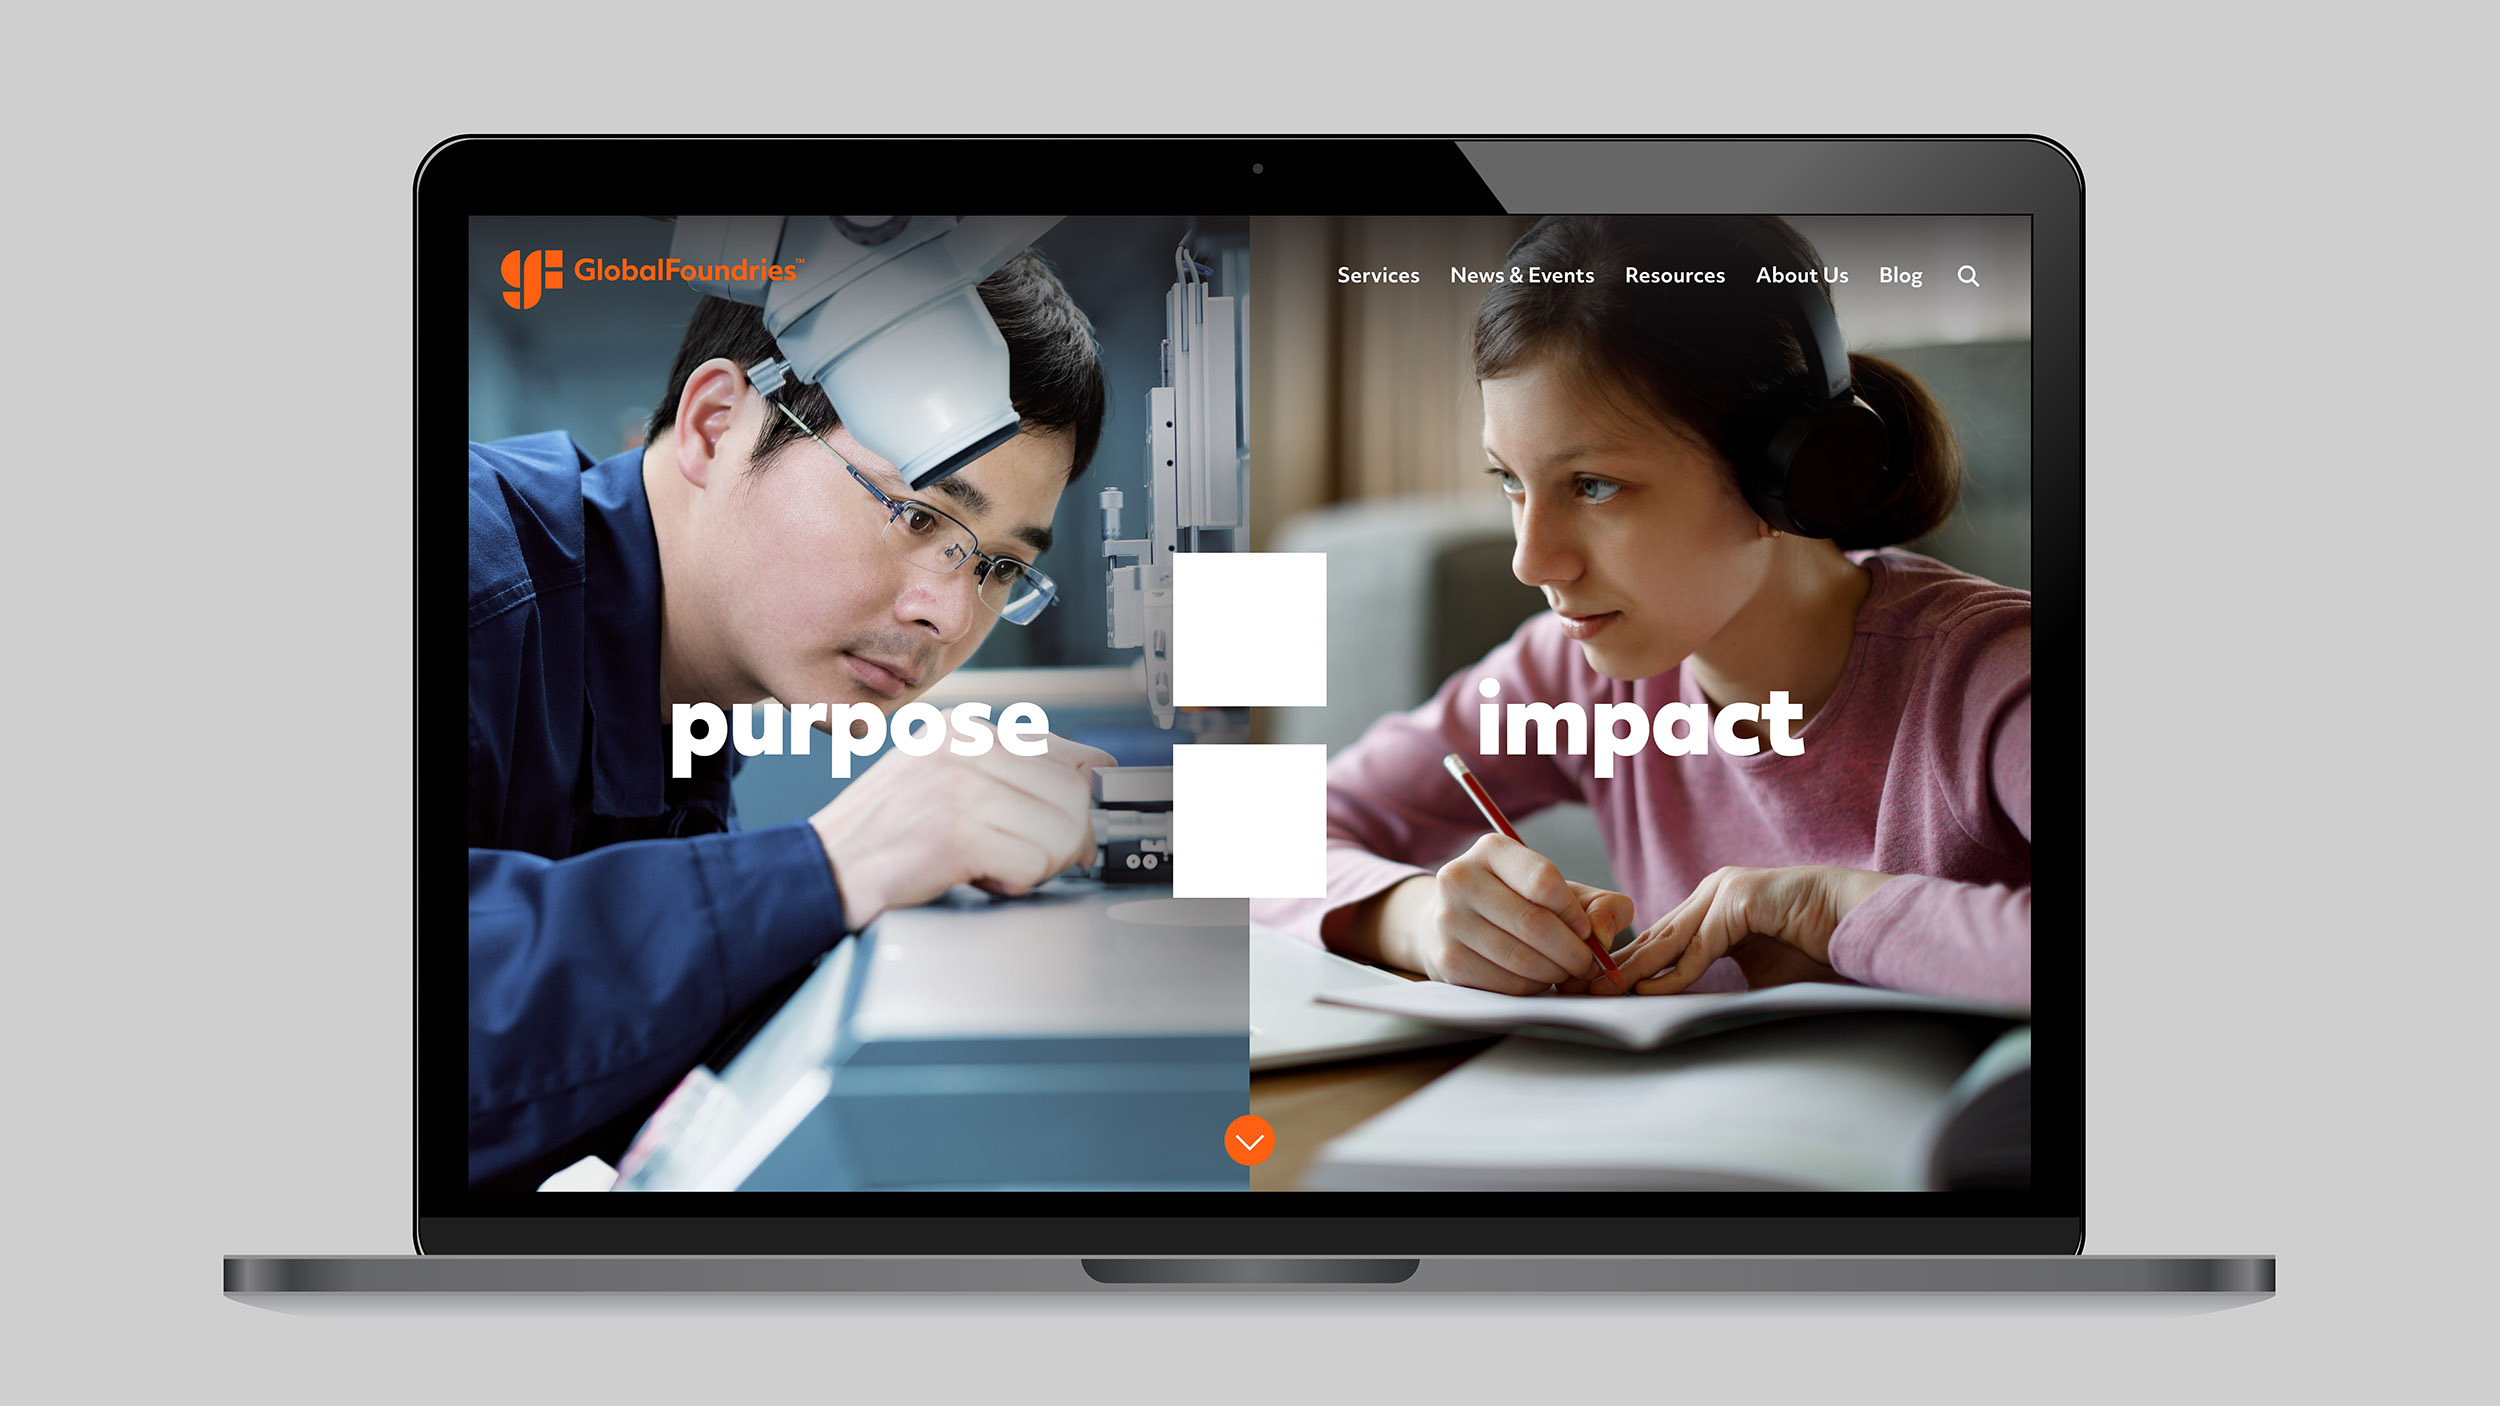 Global Foundries new website design with a student, engineer, and text that says “purpose = impact”